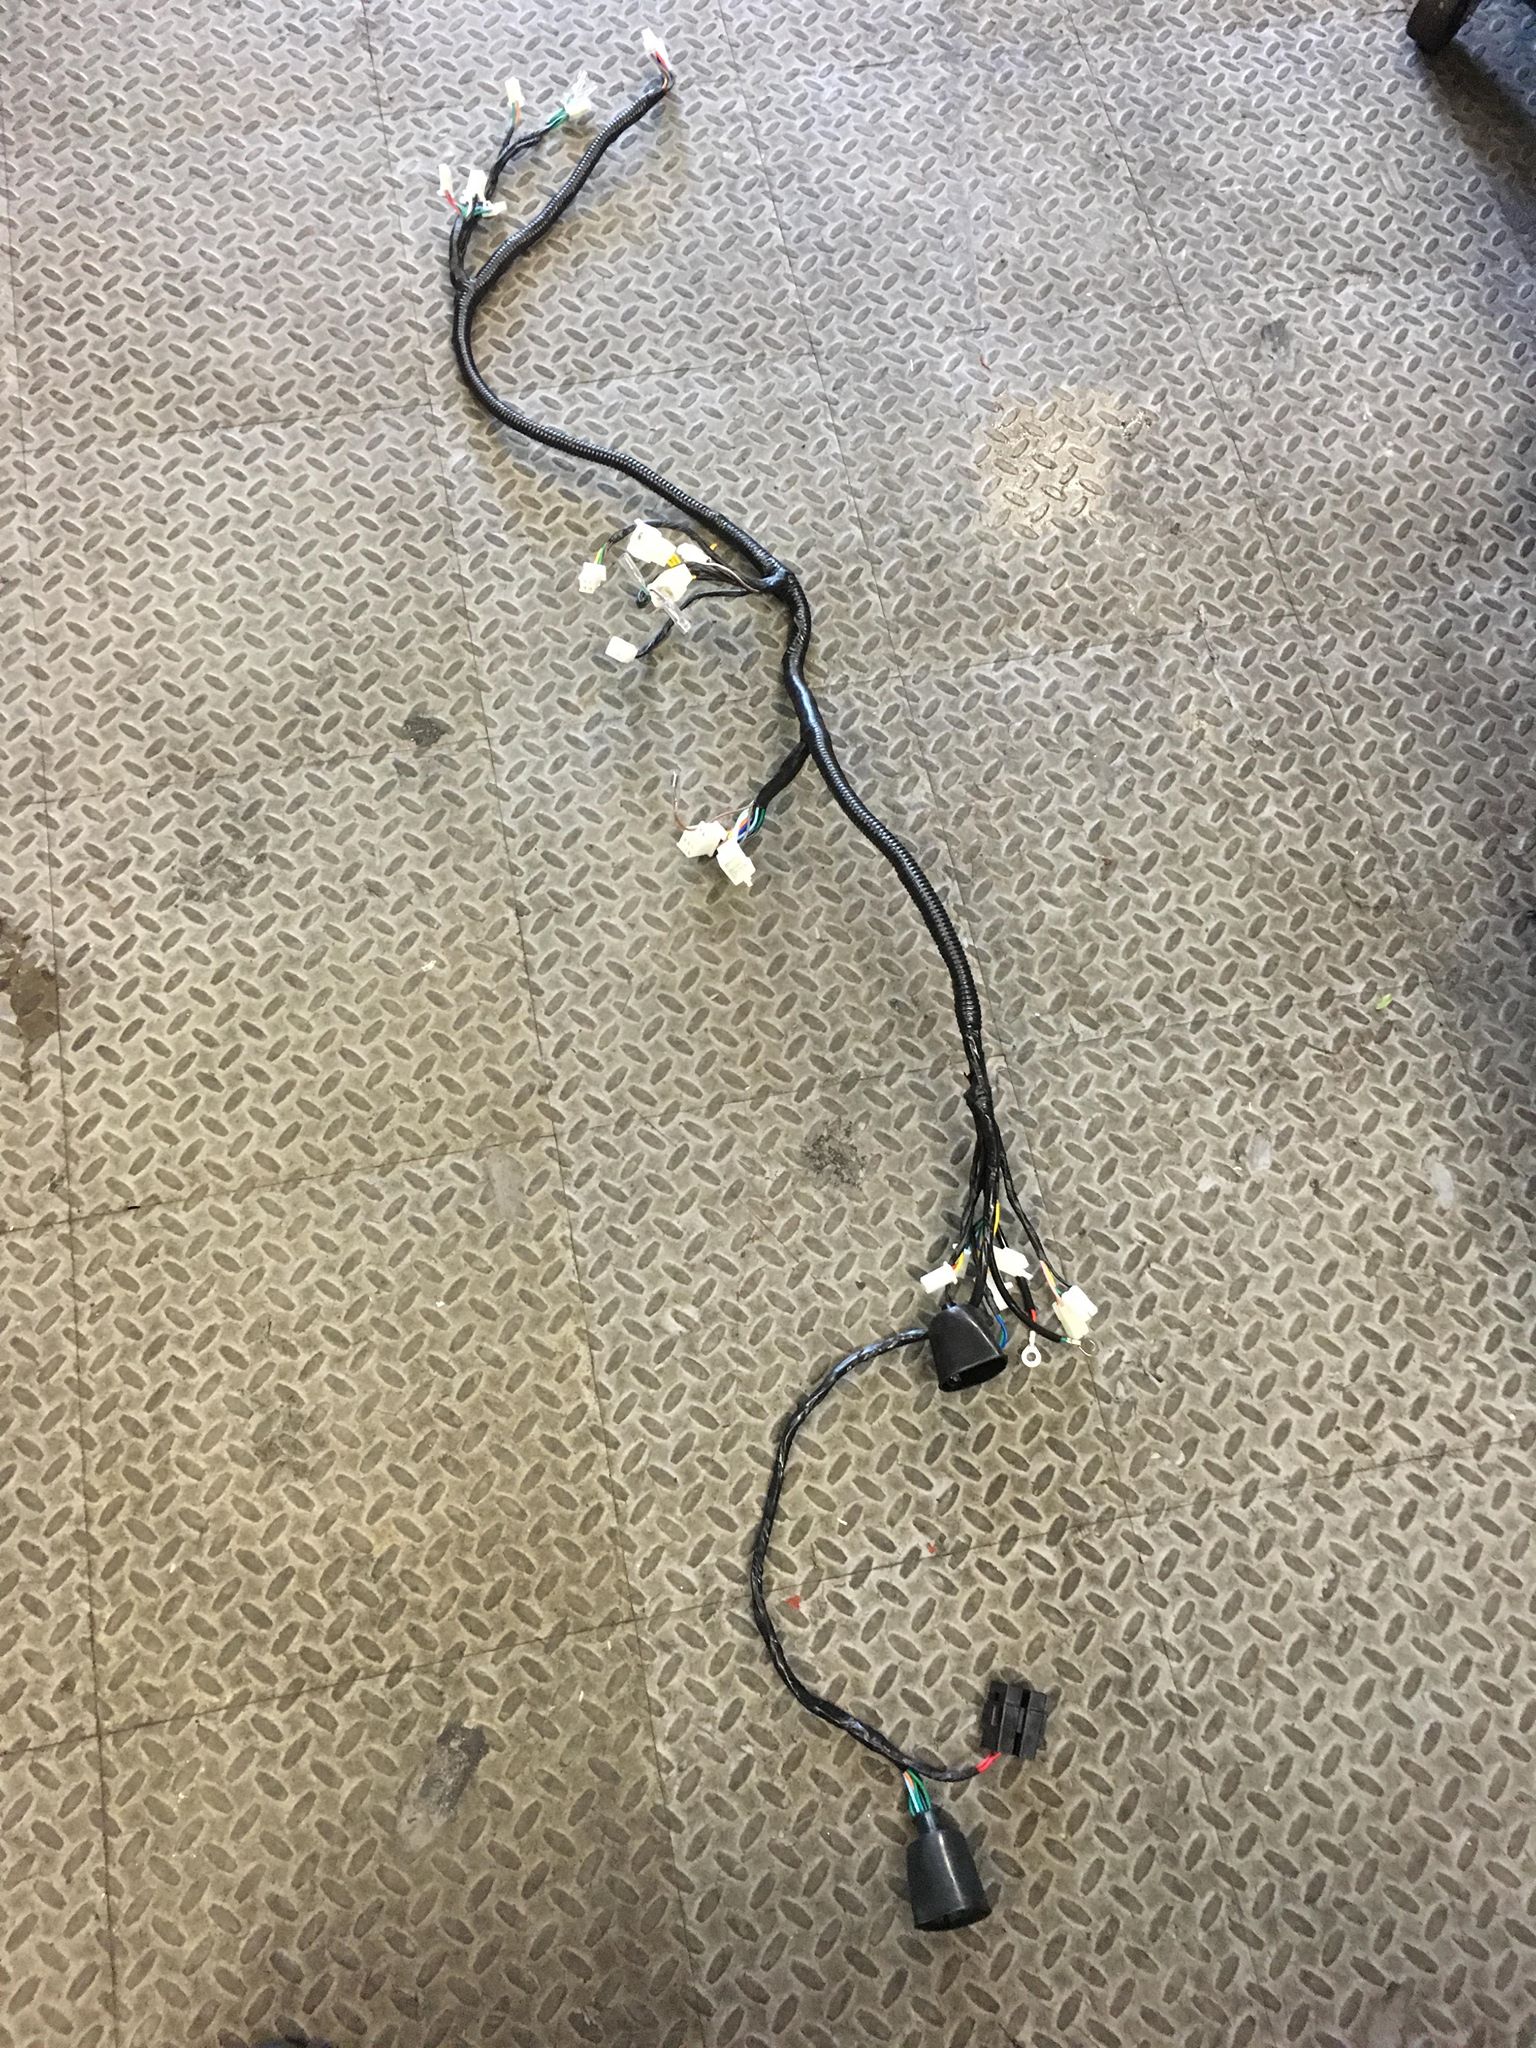 Wrong wire Harness